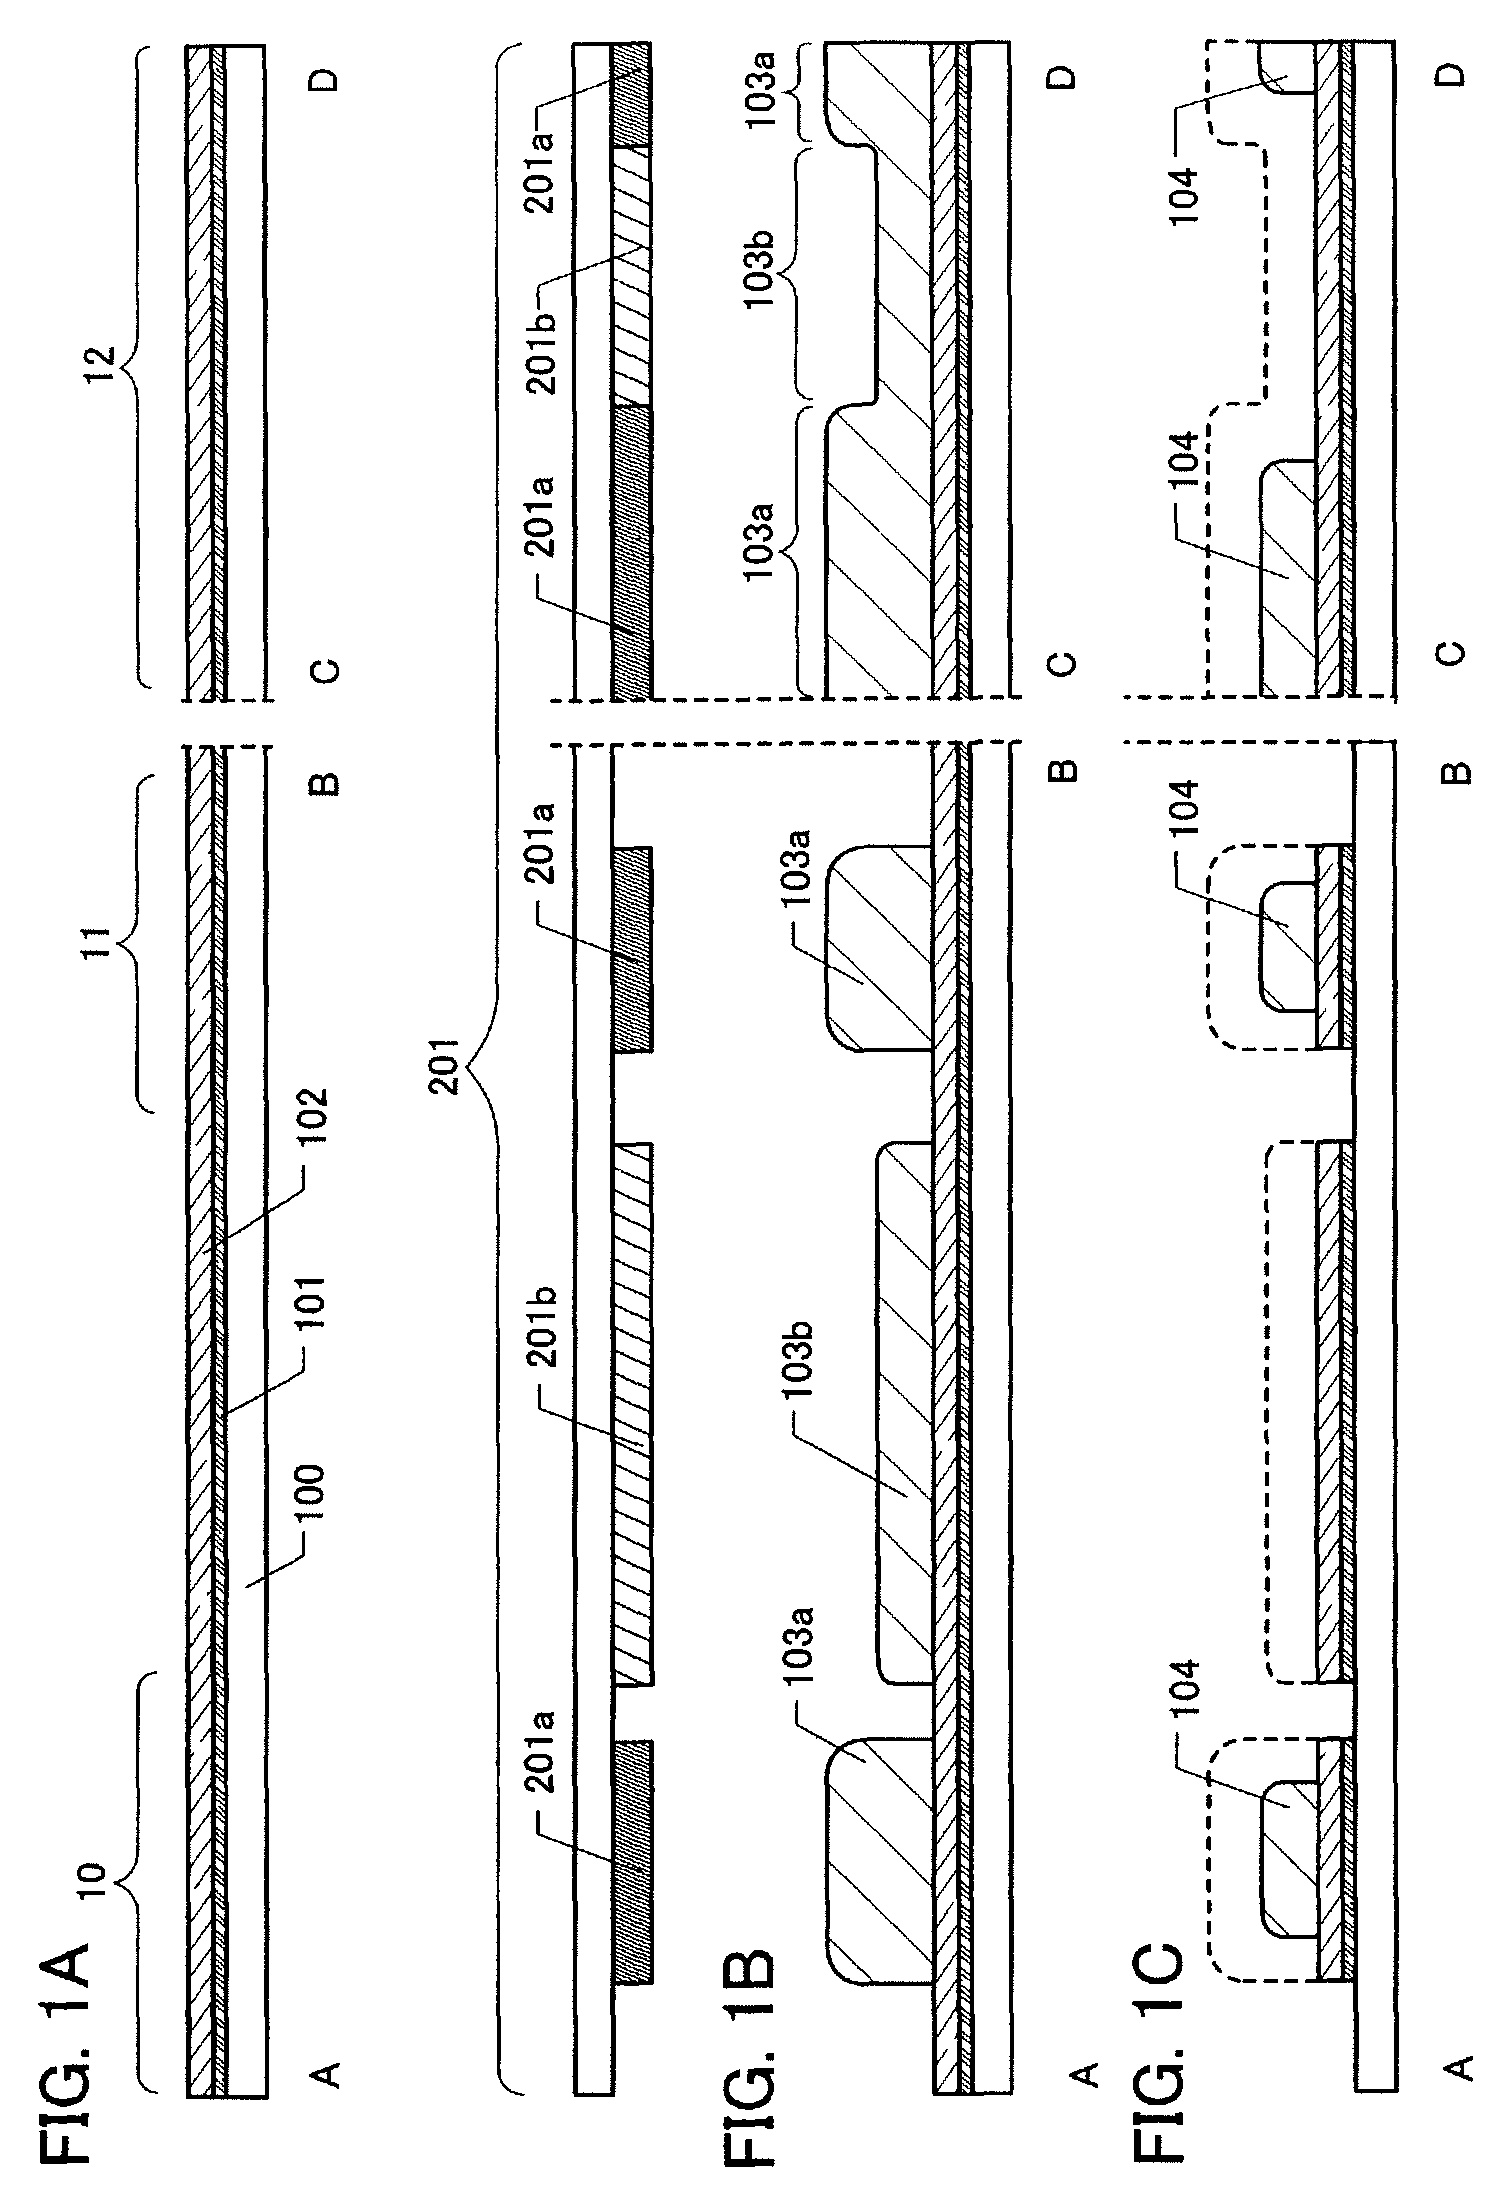 Method for manufacturing an LCD device employing a reduced number of photomasks